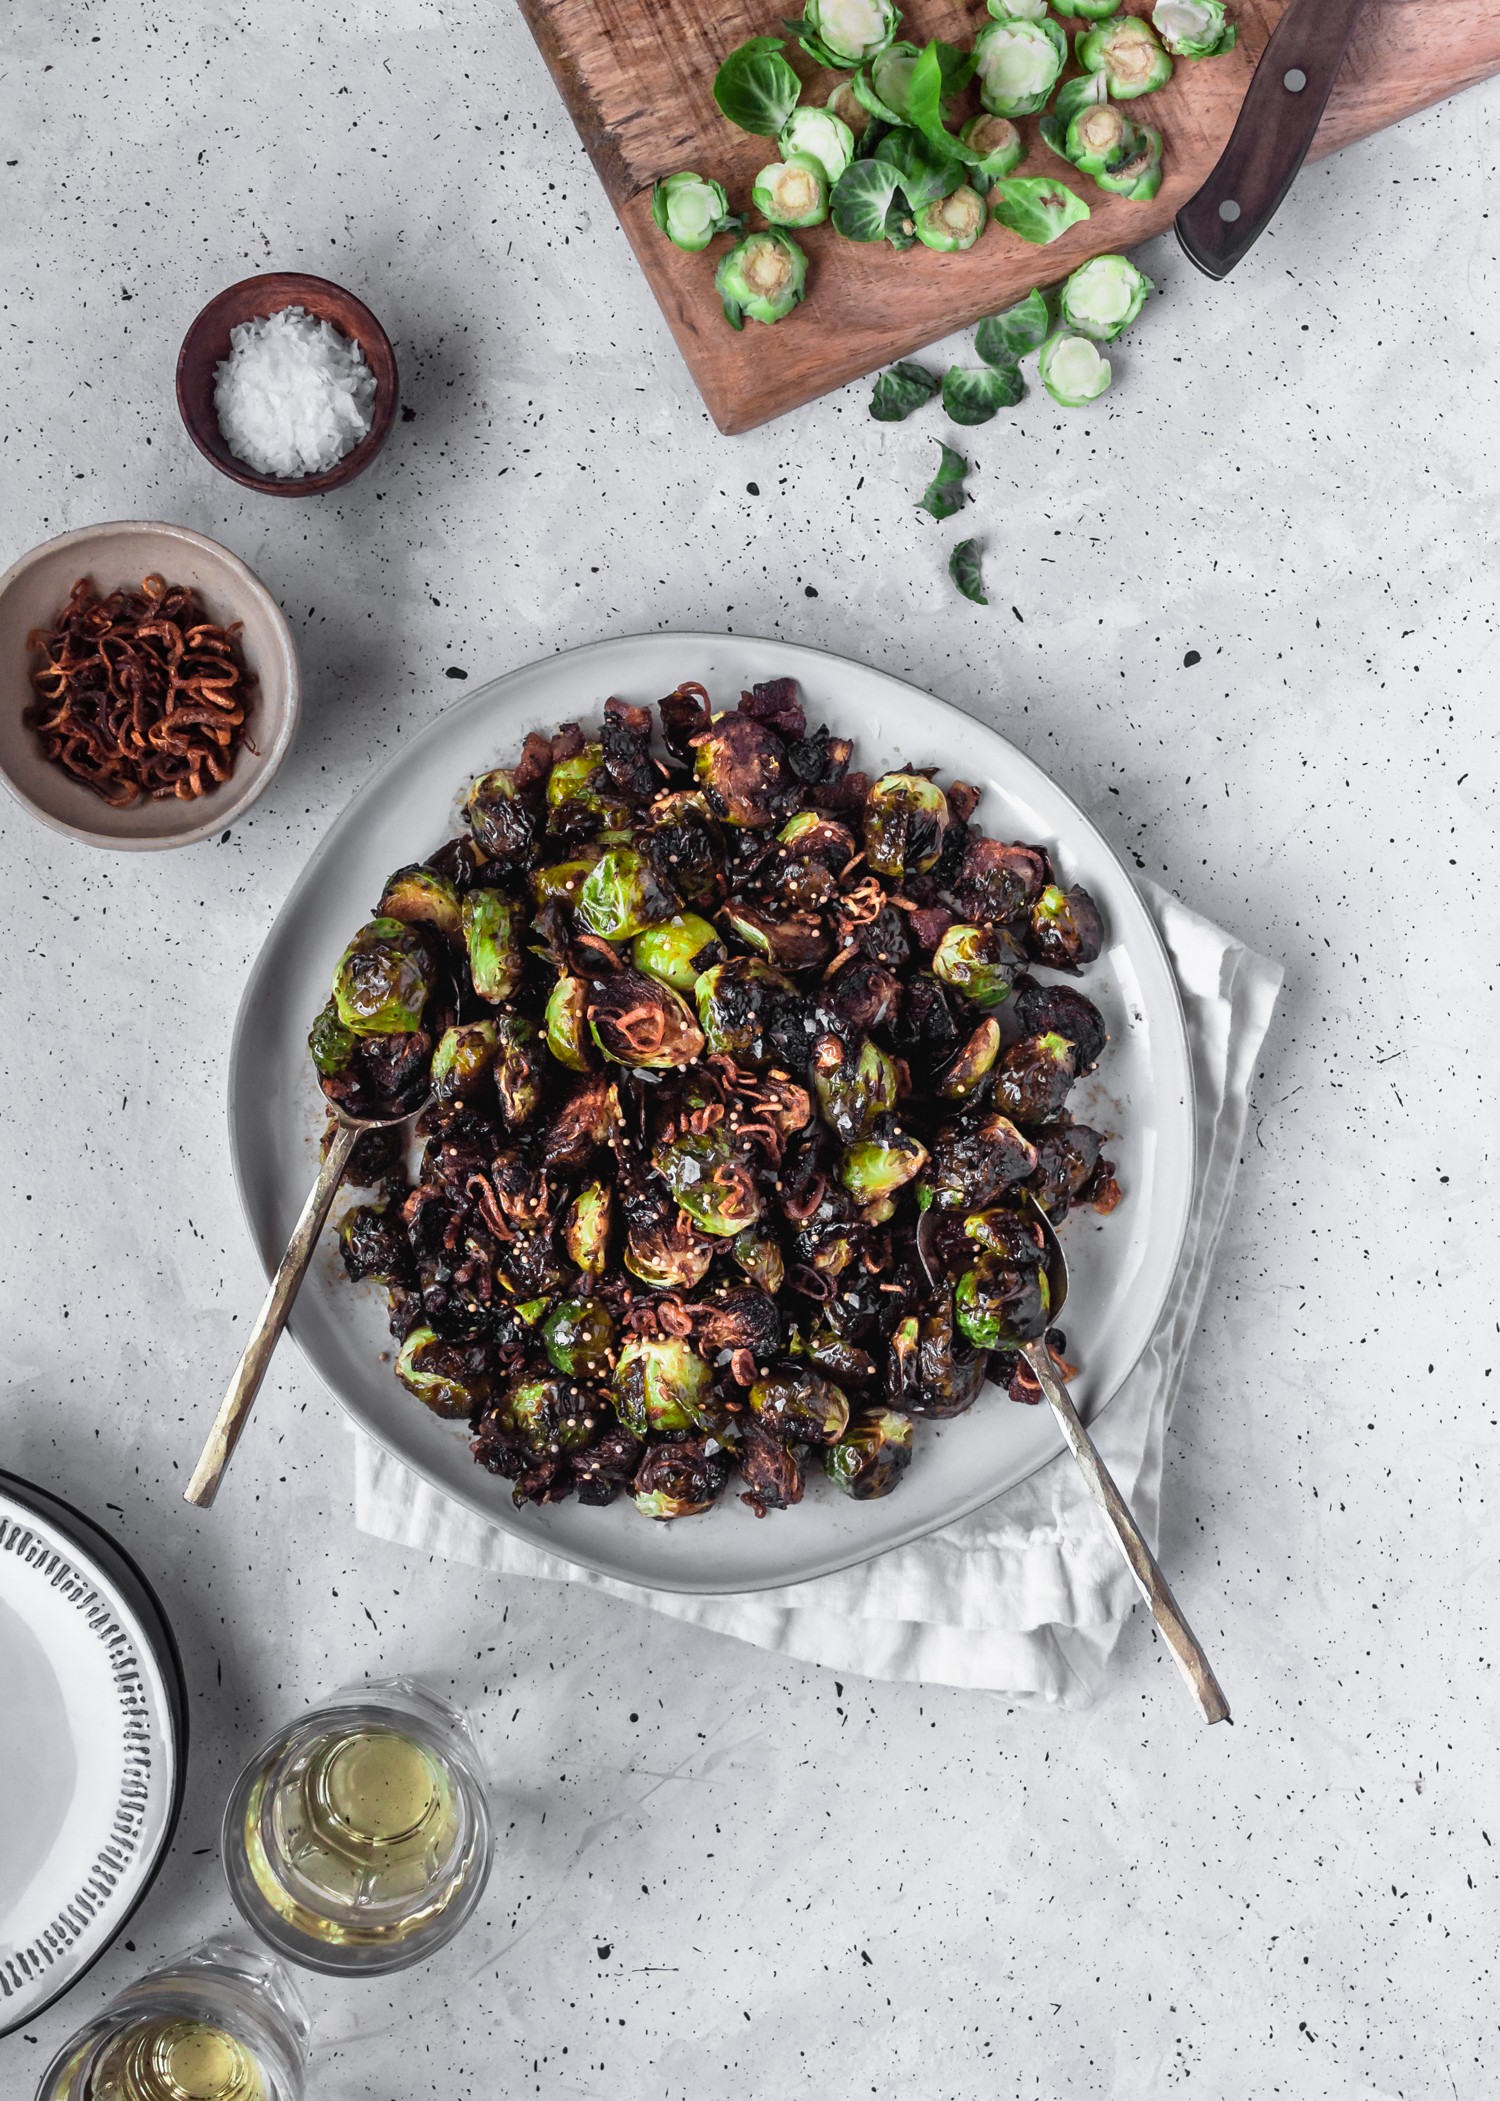 Crispy Brussels Sprouts with Fried Shallots, Bacon, & Dijon Vinaigrette